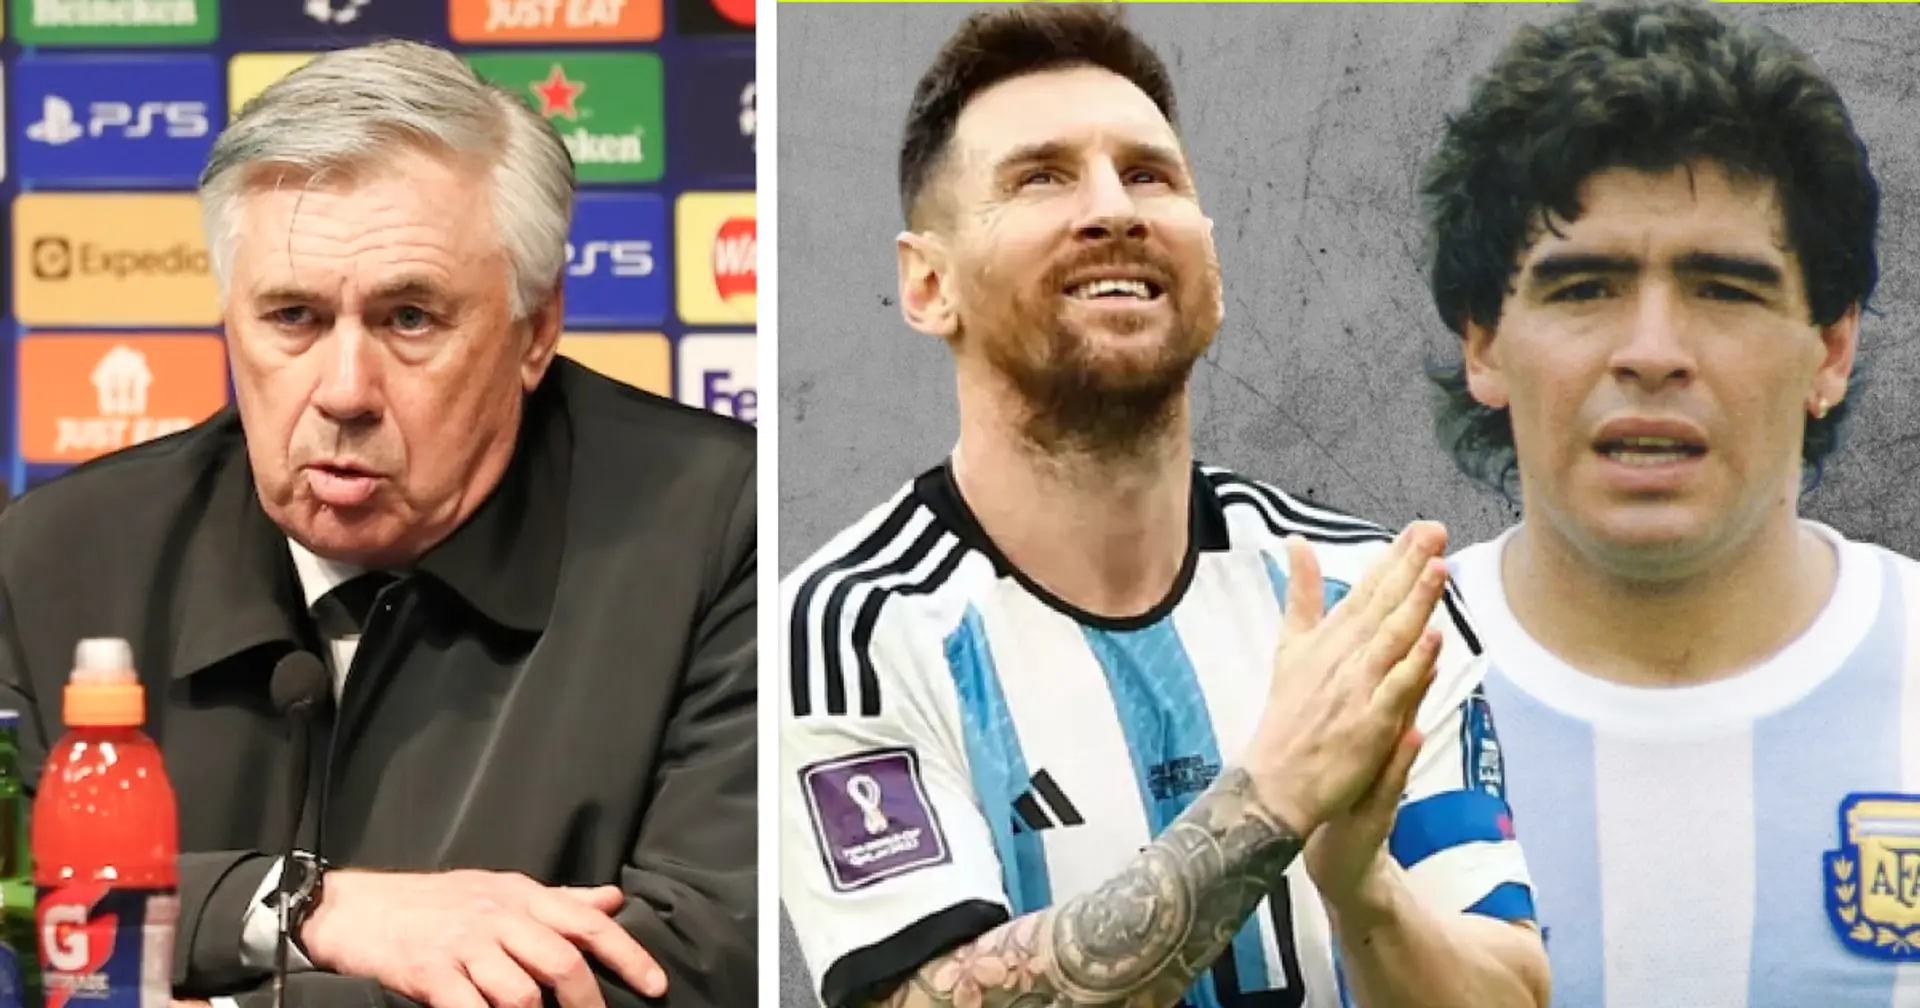 'What sort of question is this?': Ancelotti asked to pick between Maradona and Messi 